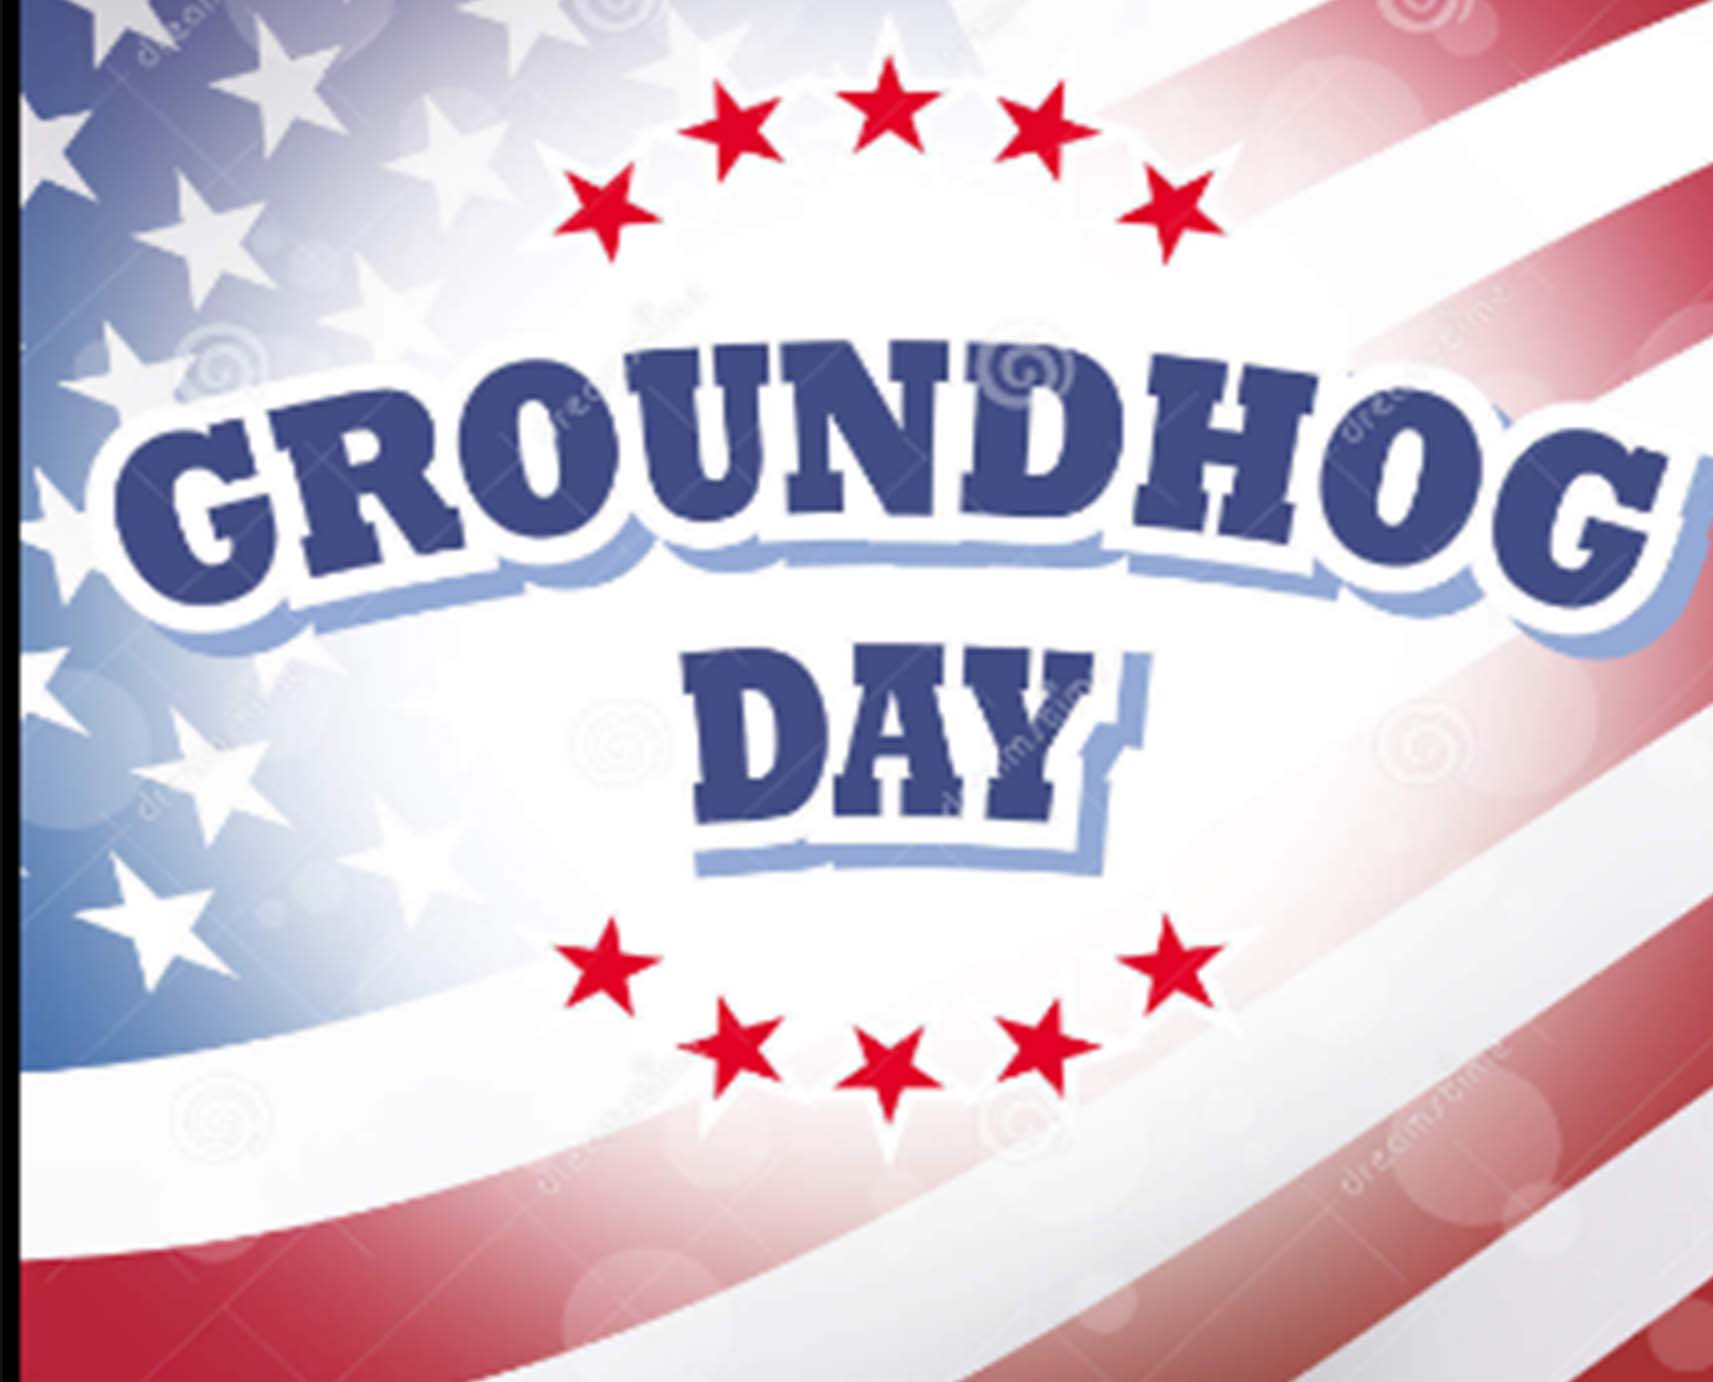 Groundhog Day in the United States